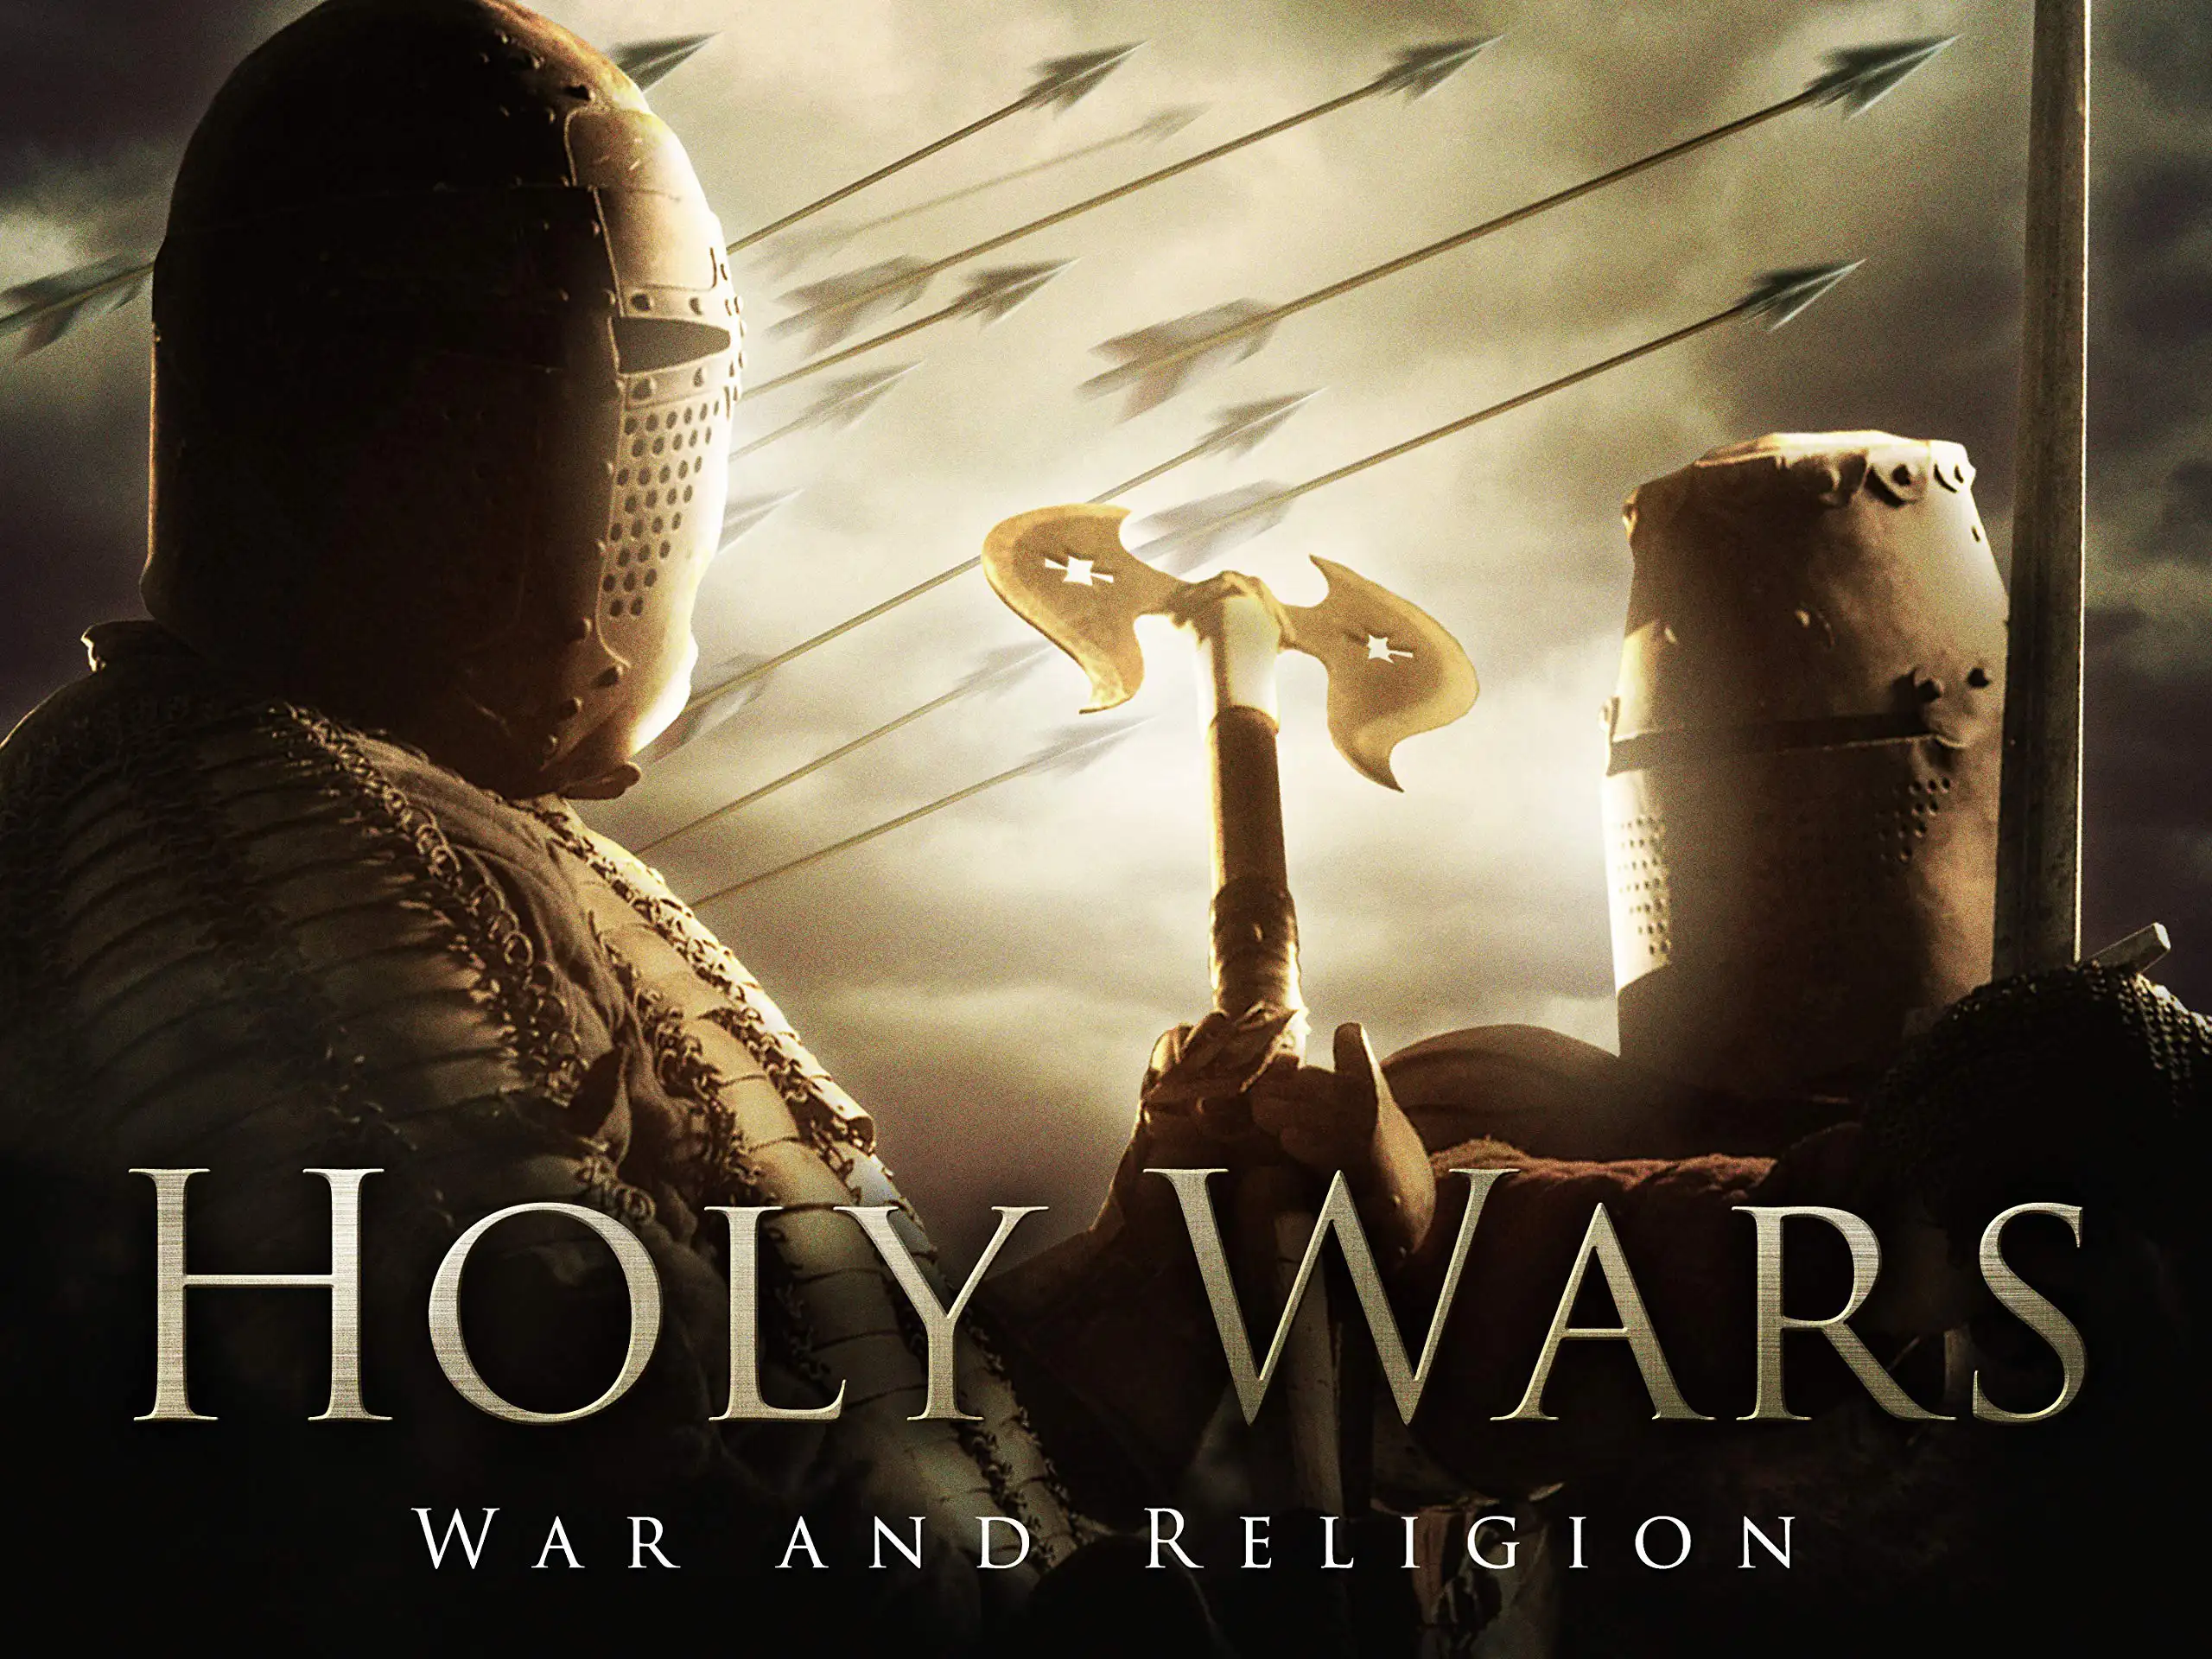 The Holy Wars: War and Religion episode 2